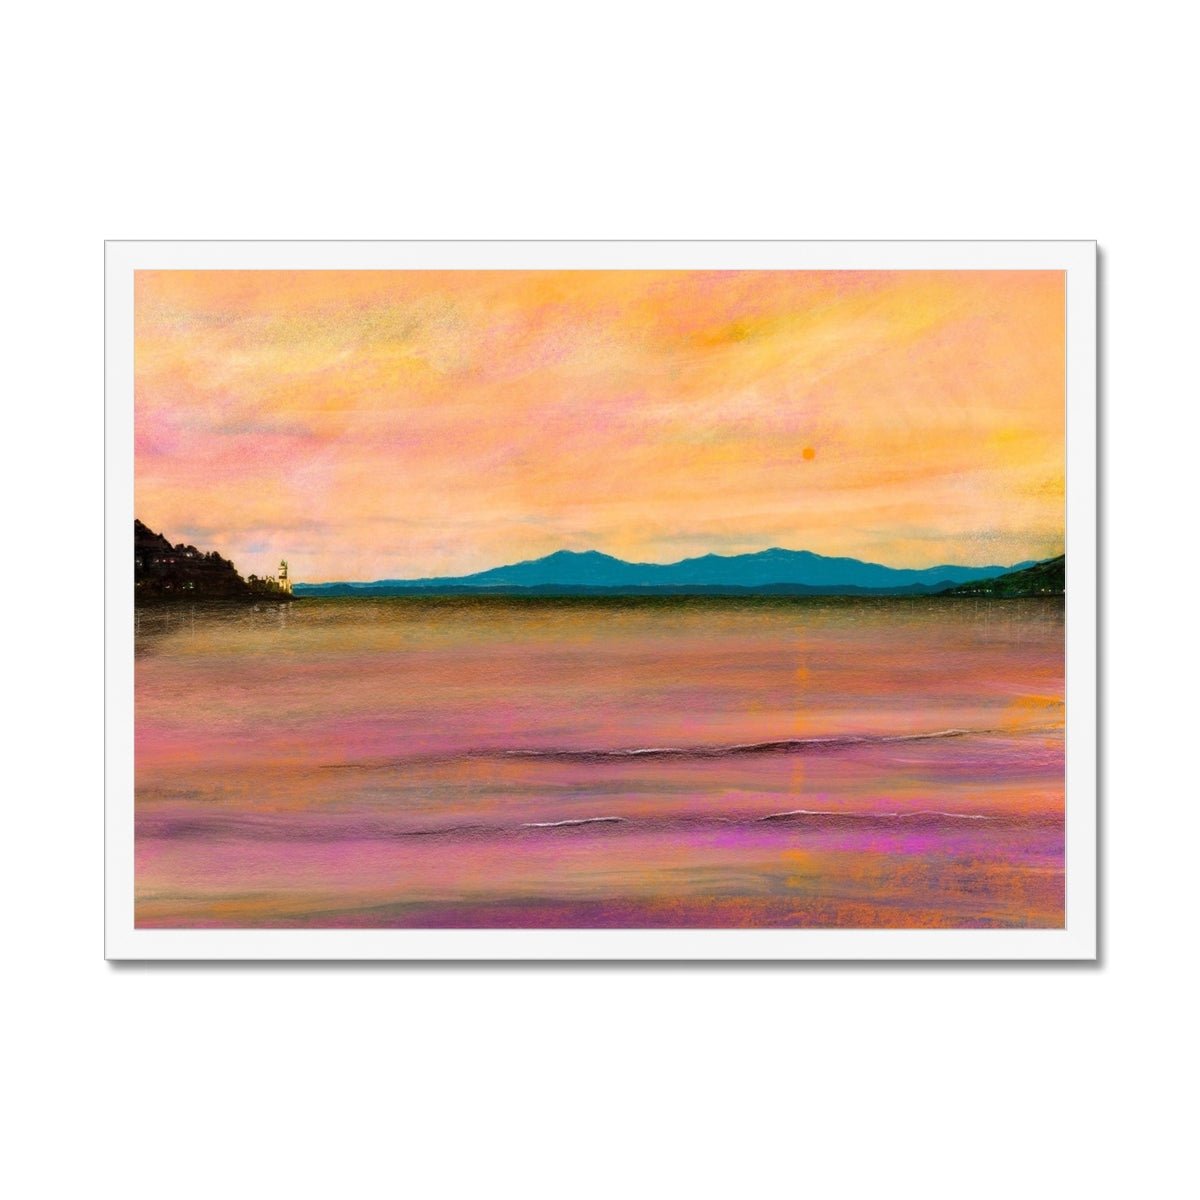 Dusk Over Arran & The Cloch Lighthouse Painting | Framed Prints From Scotland-Framed Prints-Arran Art Gallery-A2 Landscape-White Frame-Paintings, Prints, Homeware, Art Gifts From Scotland By Scottish Artist Kevin Hunter